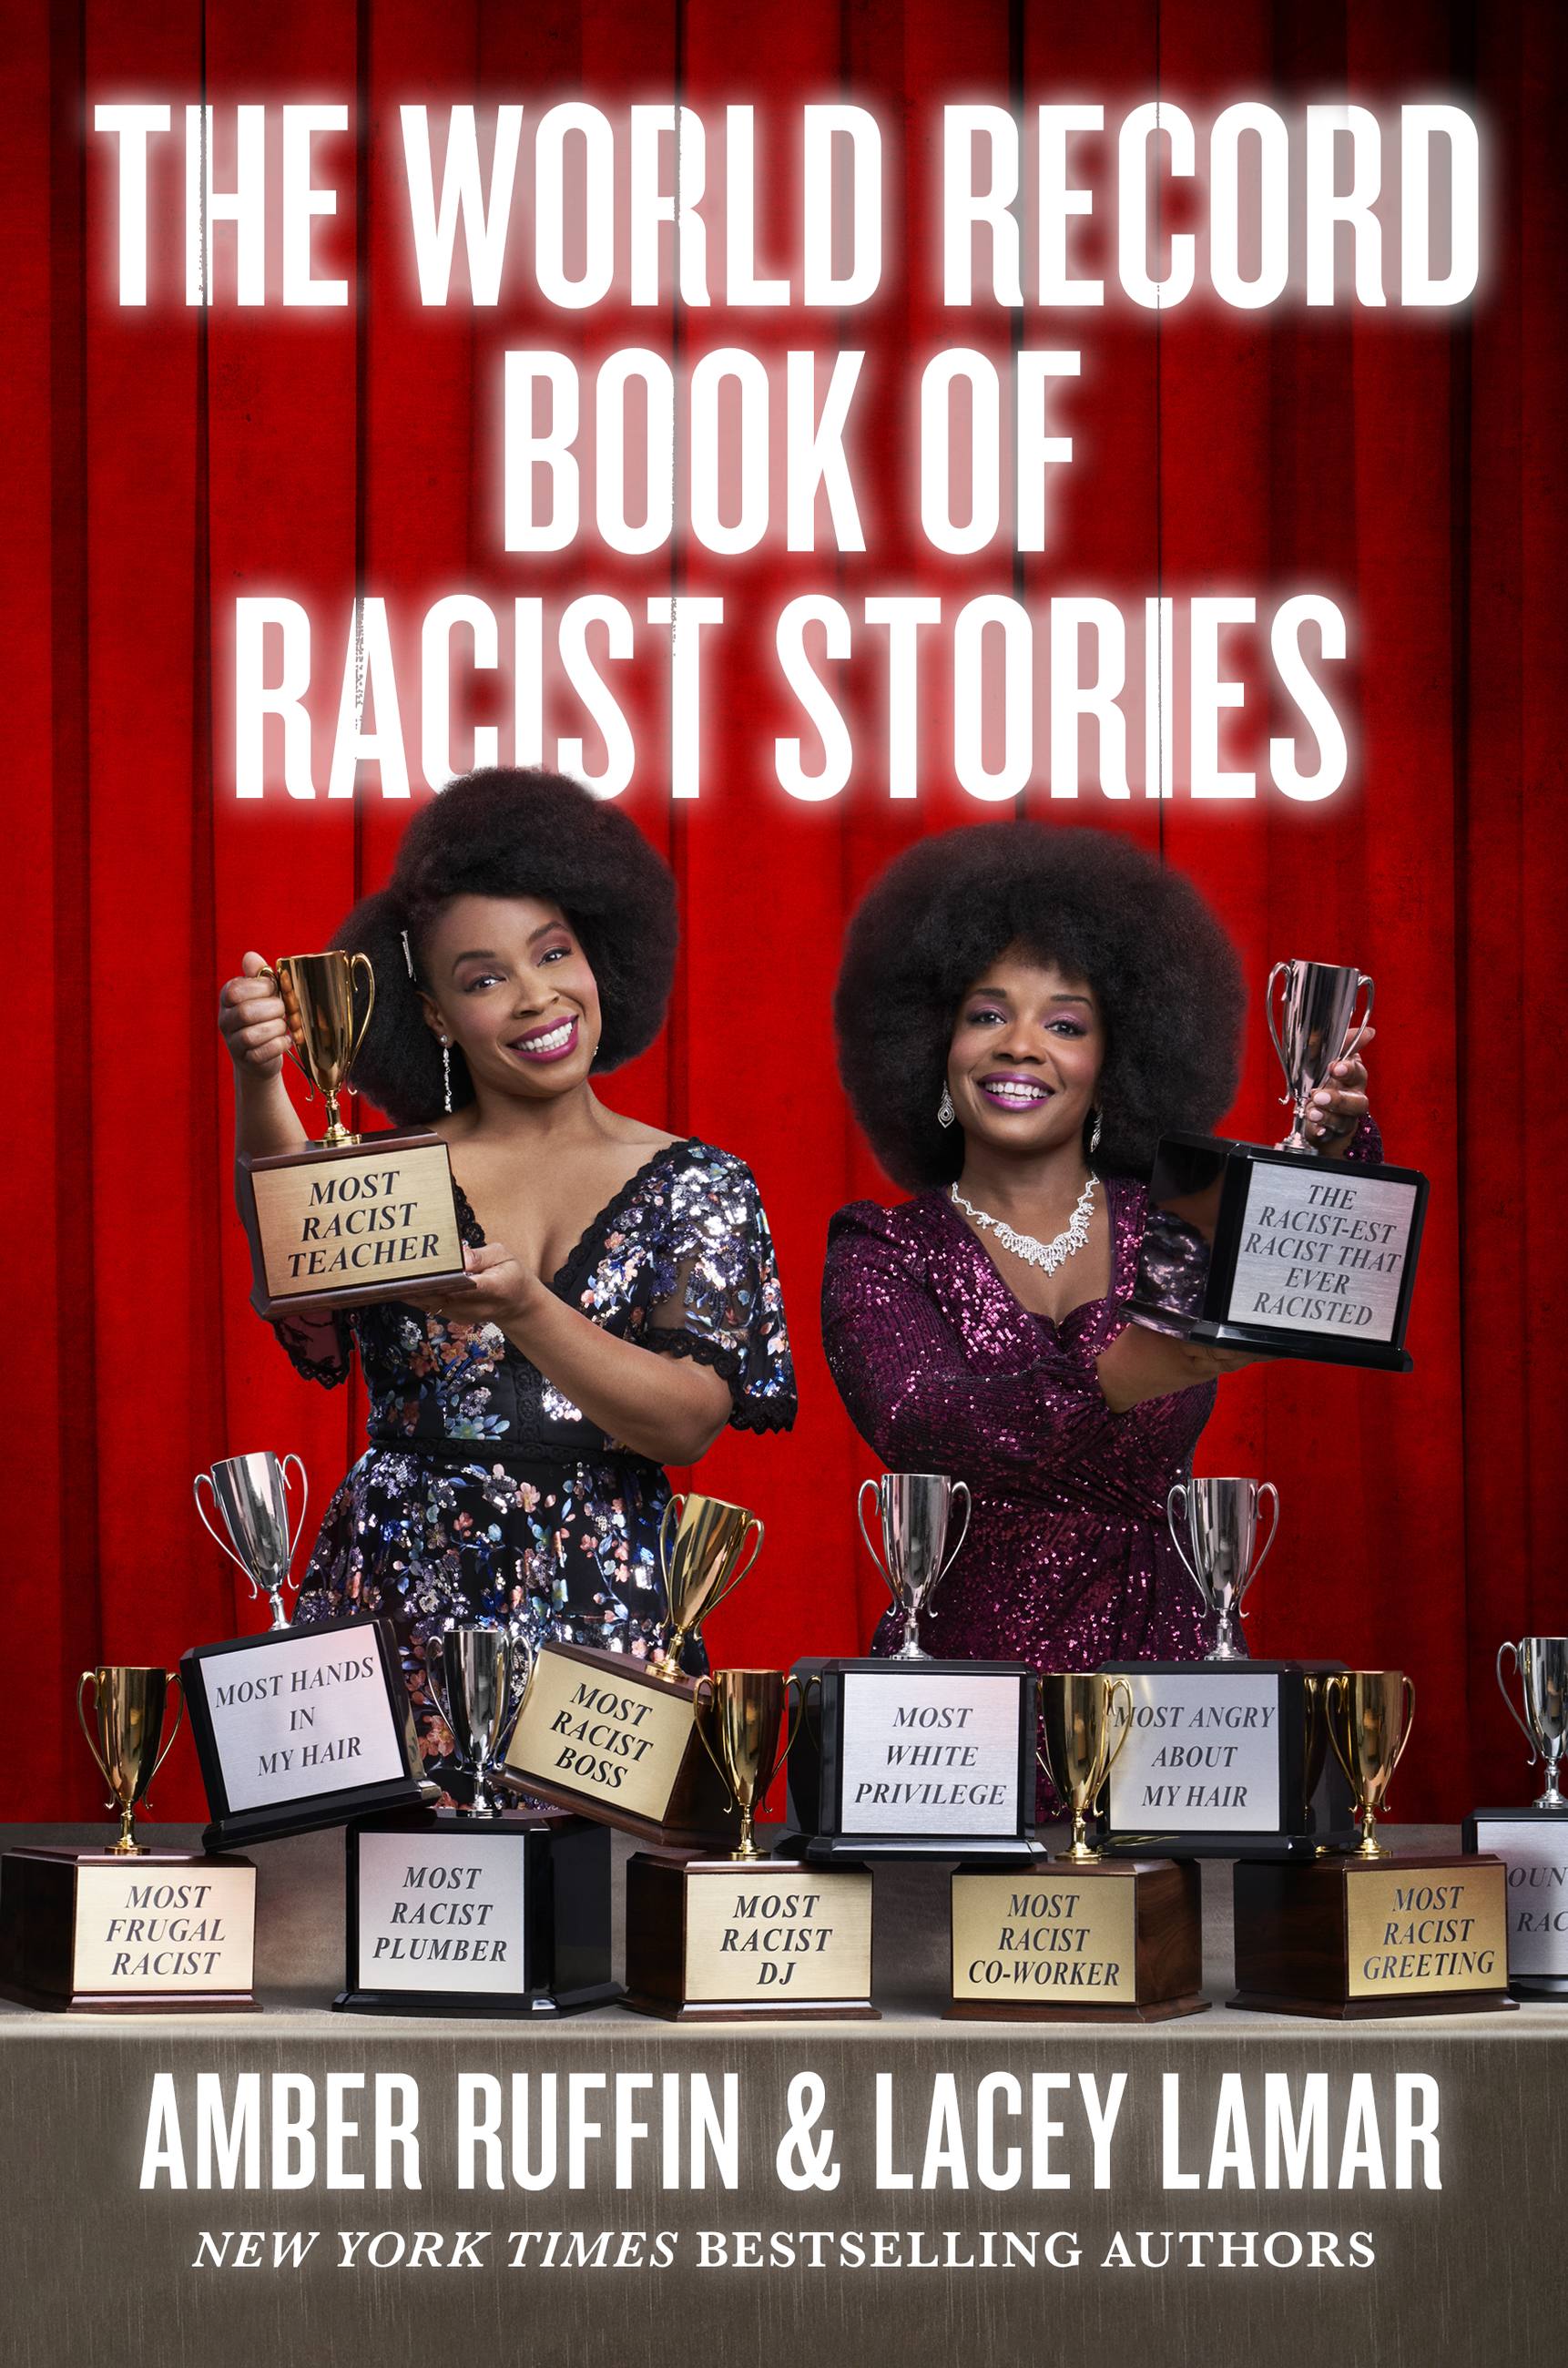 Porn Racist Sister - The World Record Book of Racist Stories by Amber Ruffin & LACEY LAMAR |  Hachette Book Group